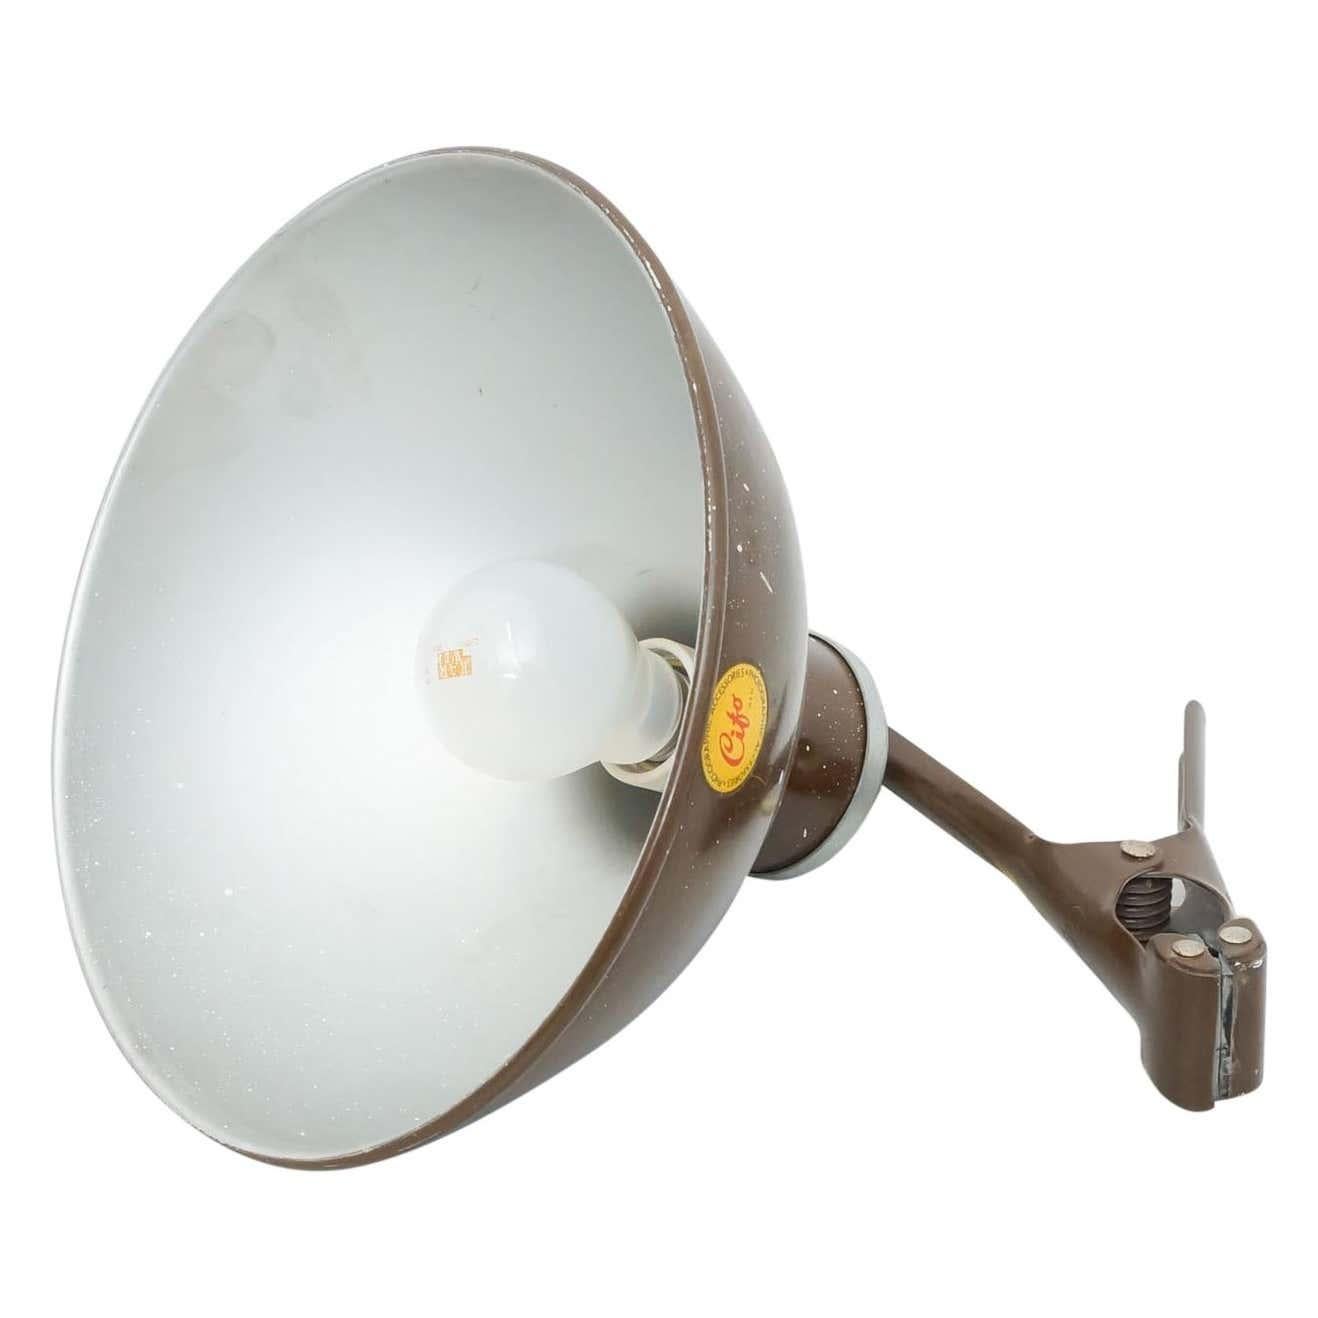 Lamp, circa 1940.
By unknown manufacturer, from Spain.

In original condition, with some visible signs of previous use and age, preserving a beautiful patina.

Materials:
Metal

Dimensions:
ø 25.5 cm x H 23 cm.